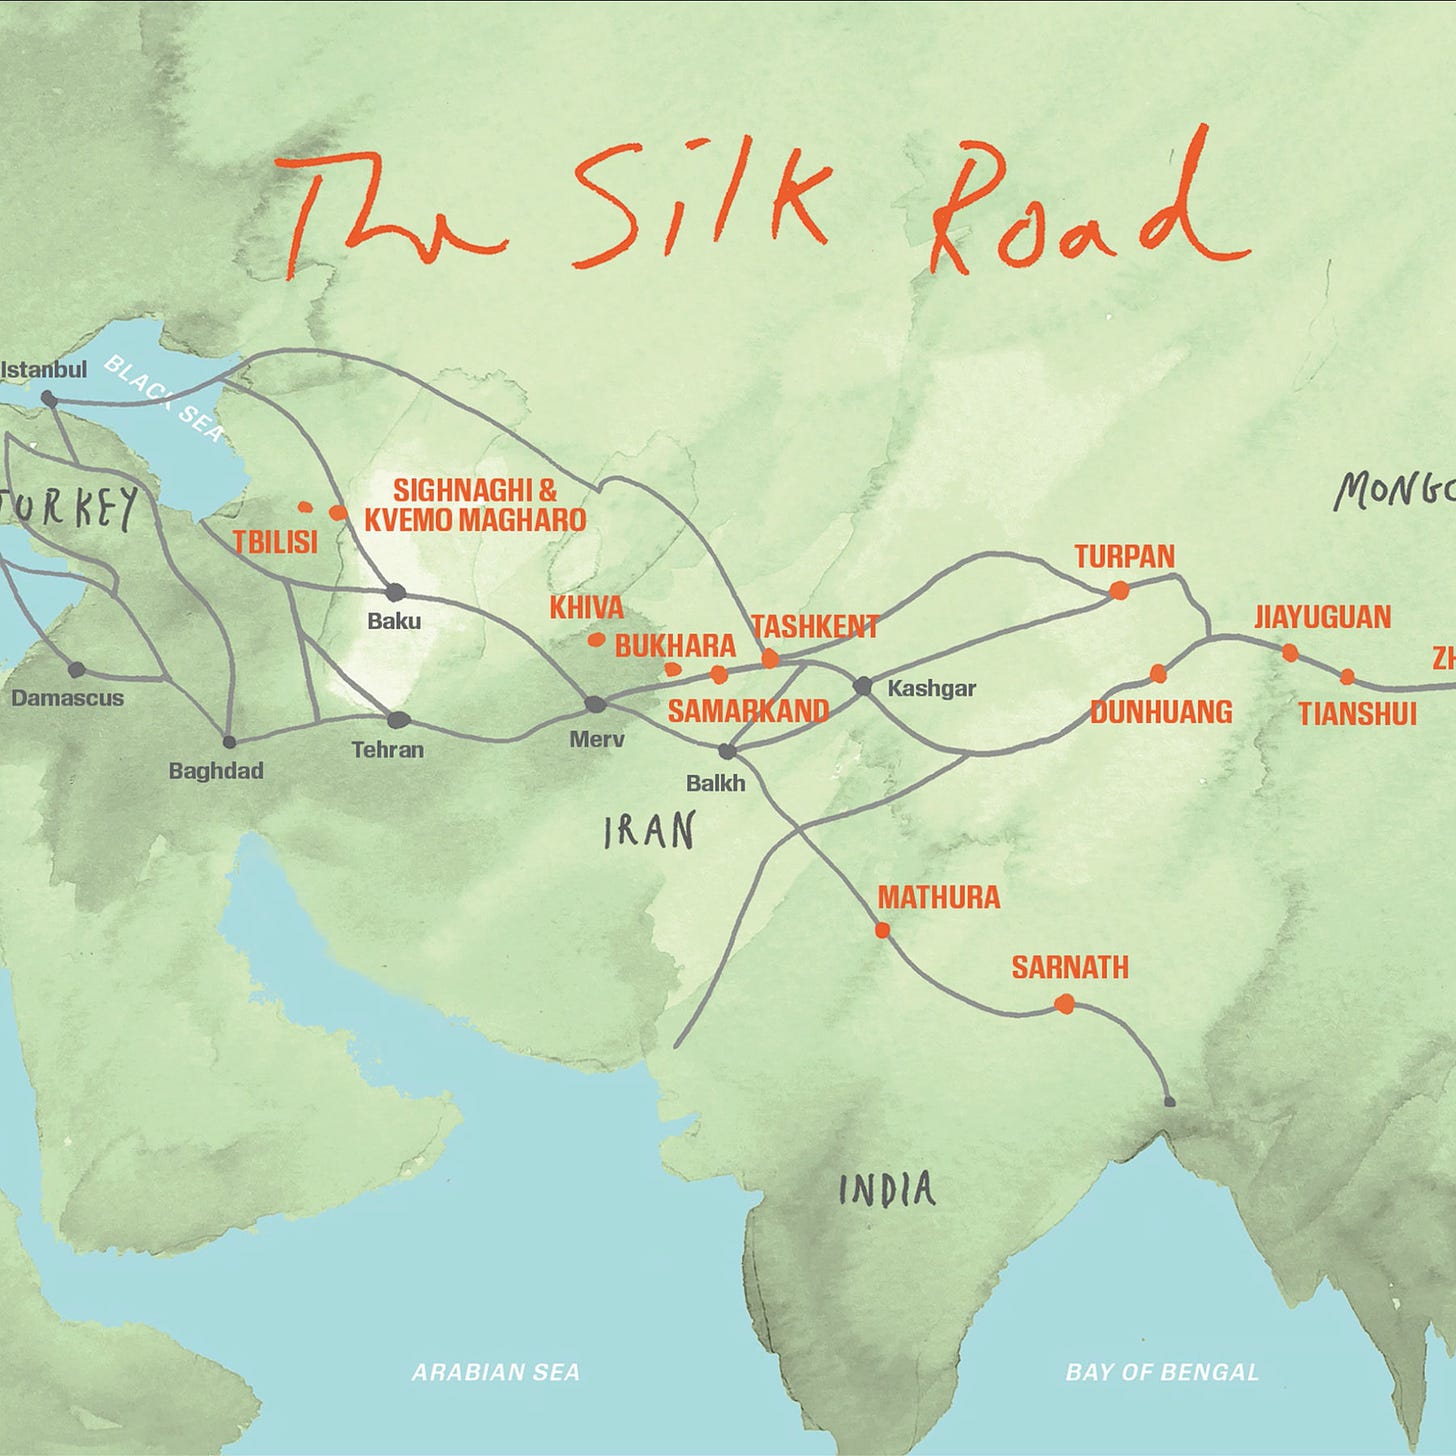 The Silk Road: The Route That Made the World - The New York Times